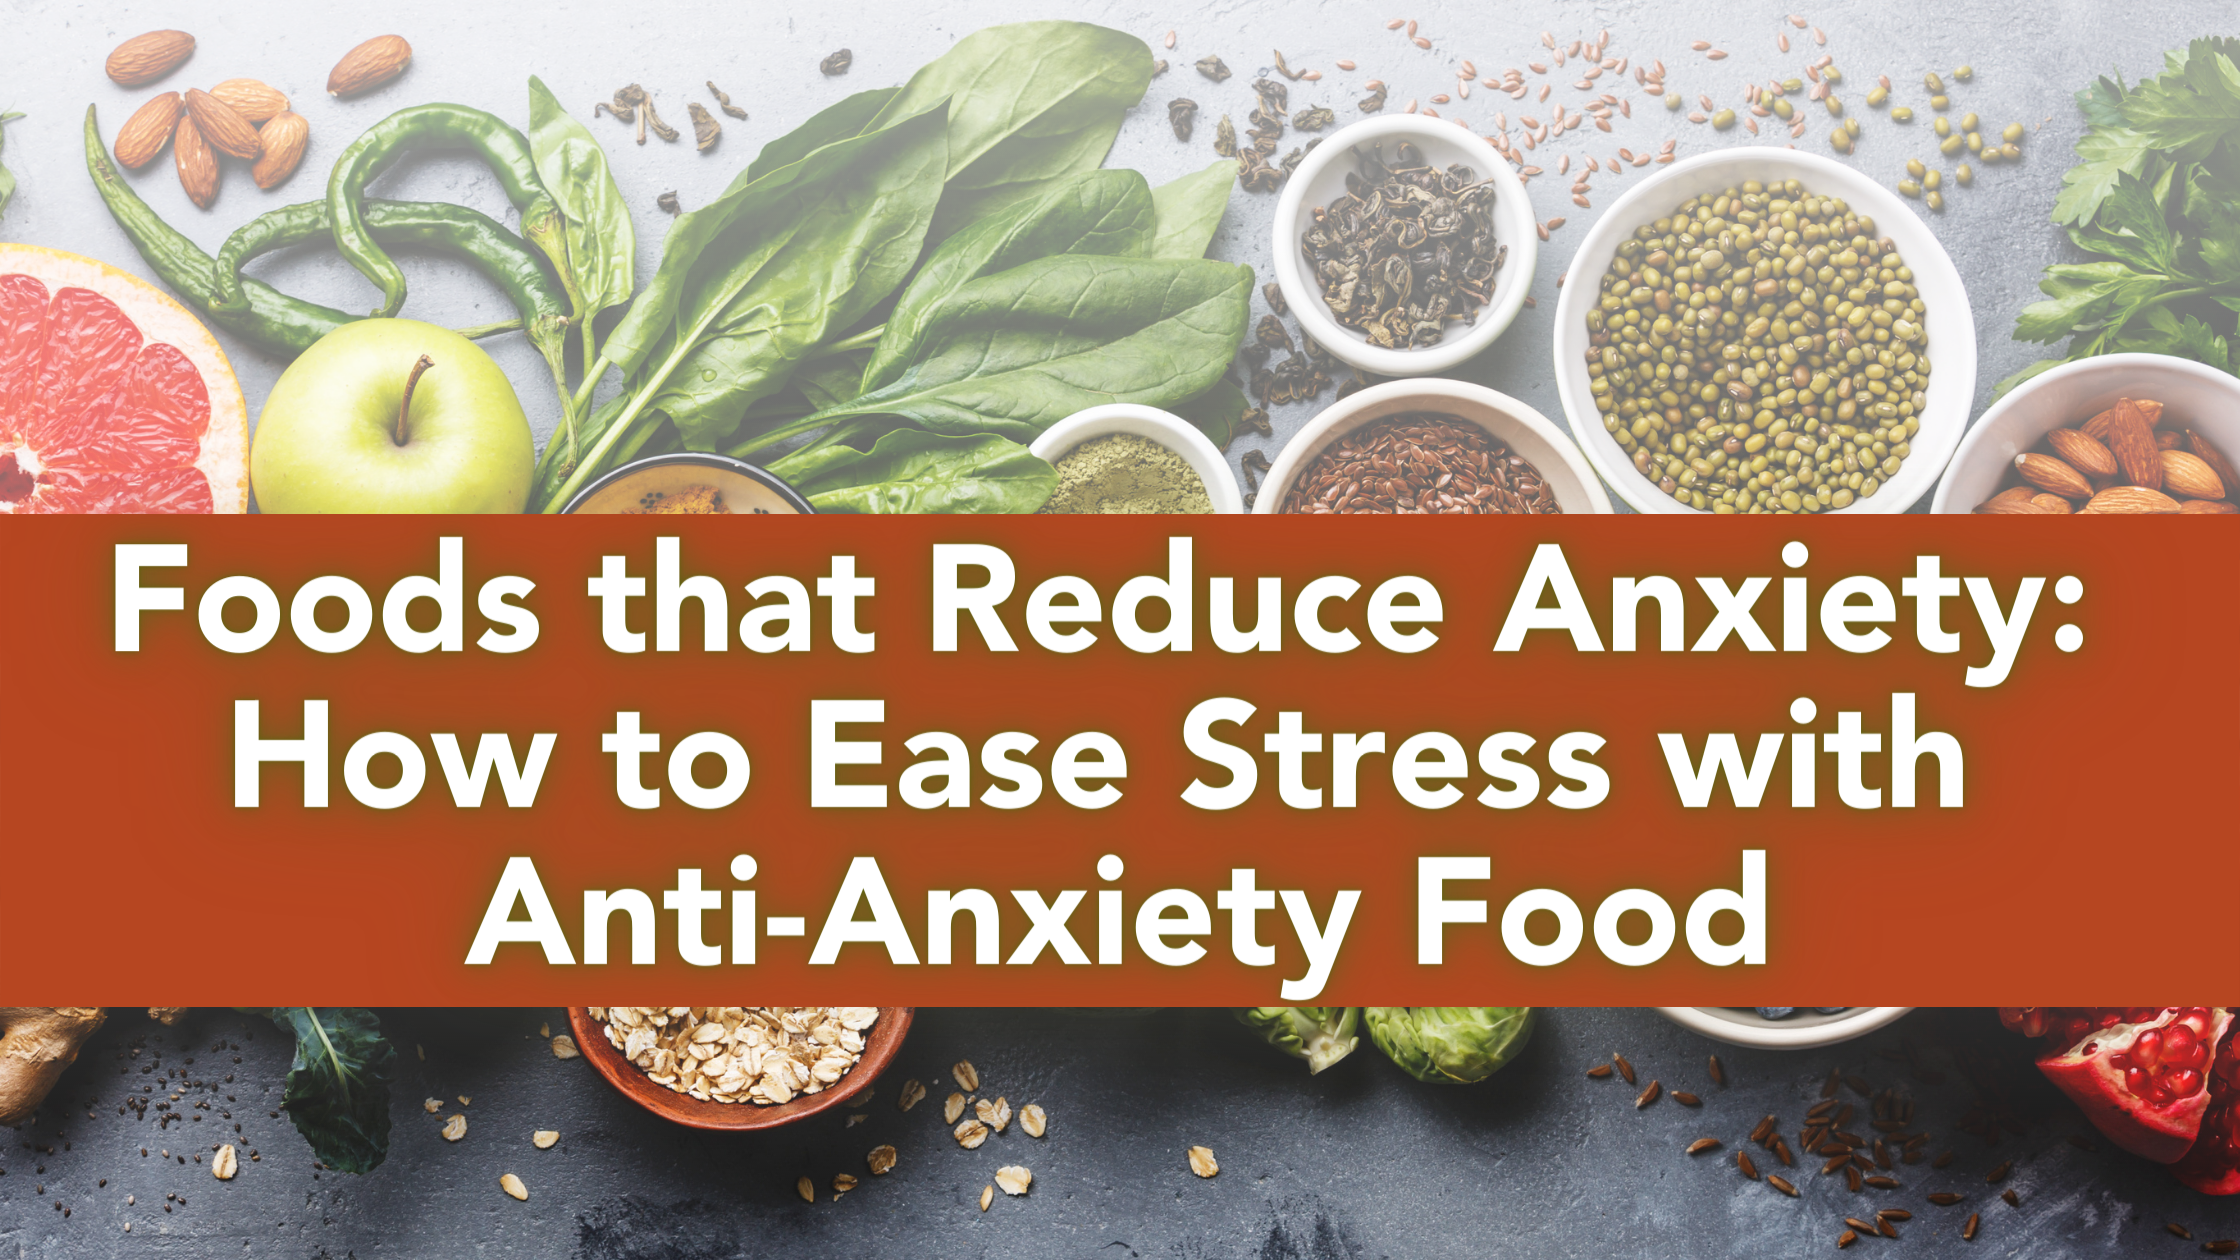 Foods that Reduce Anxiety How to Ease Stress with Anti-Anxiety Food - Blog Header